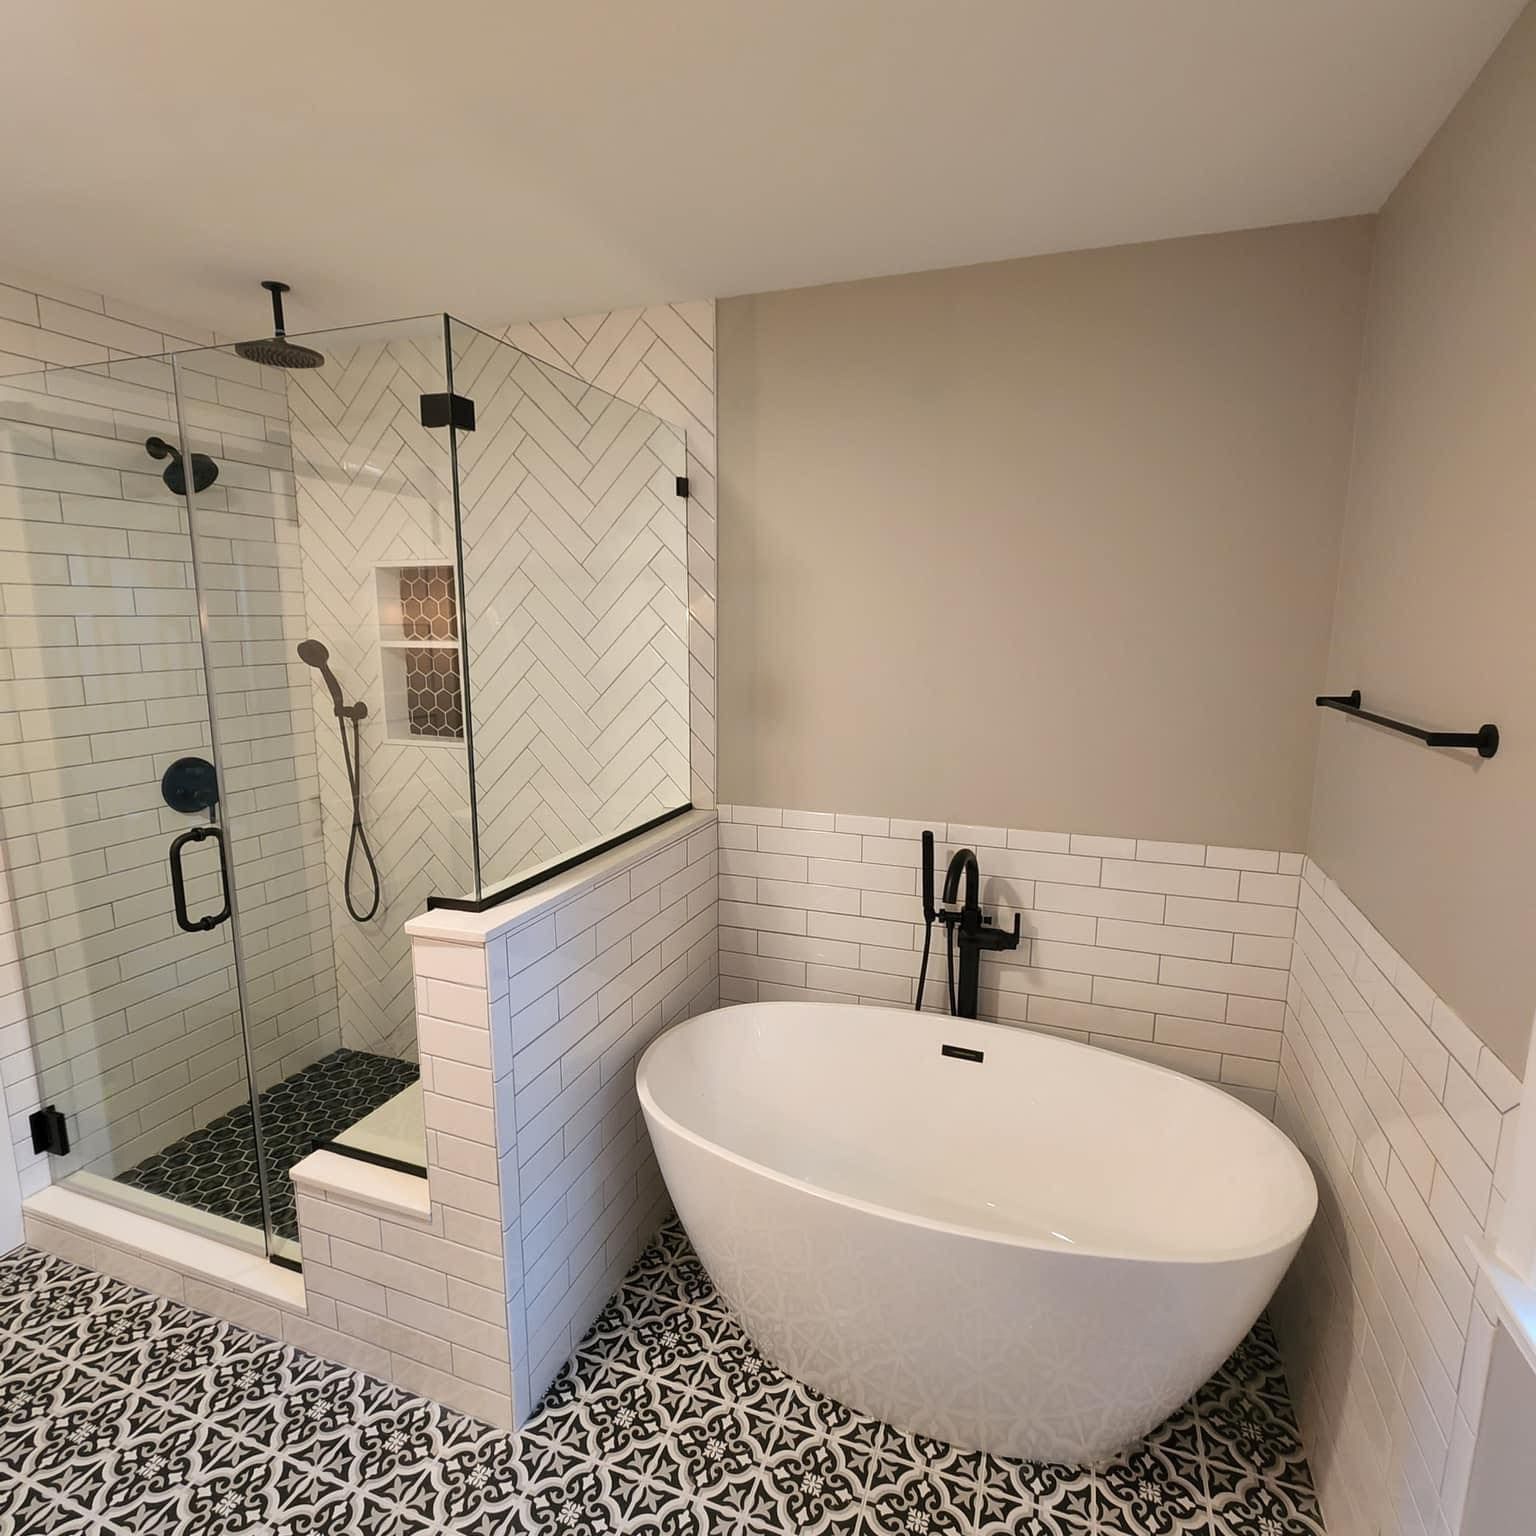 Elegant and modern bathroom upgrade by MAS Home Improvement in Lehigh Valley.